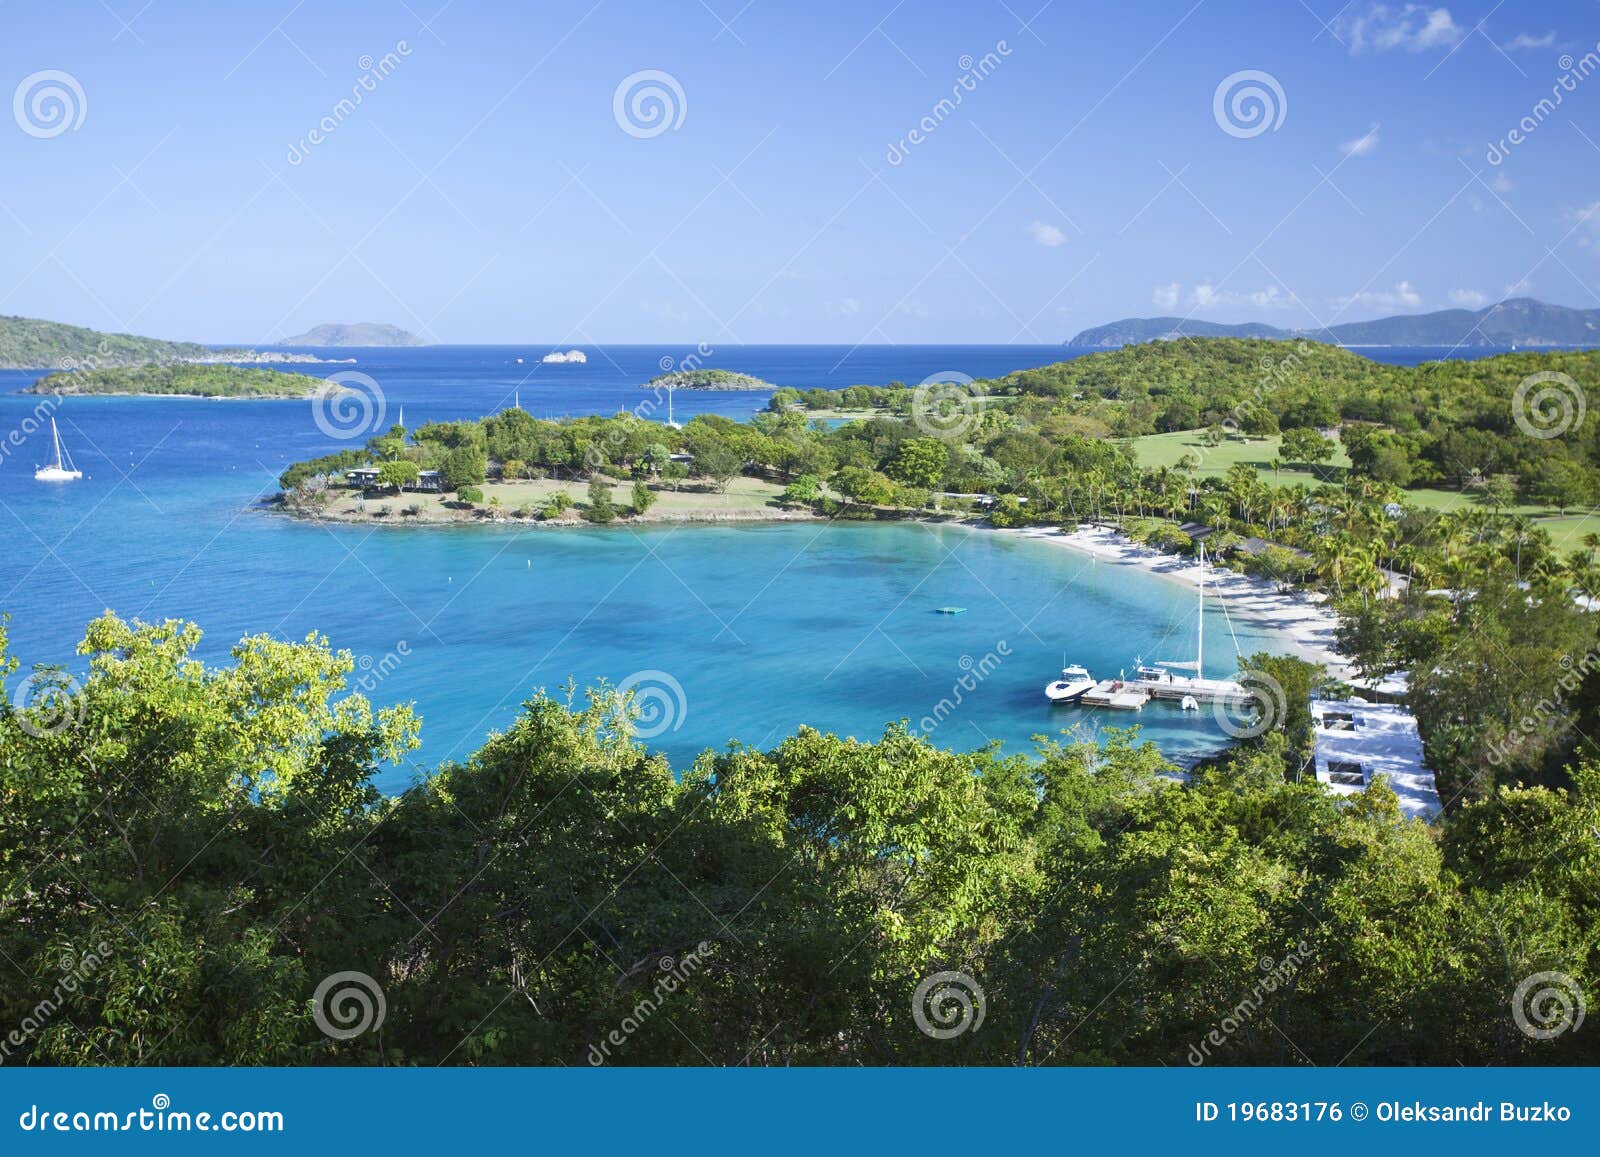 Yacht Harbor in the Caribbean Stock Photo - Image of harbor, sand: 19683176